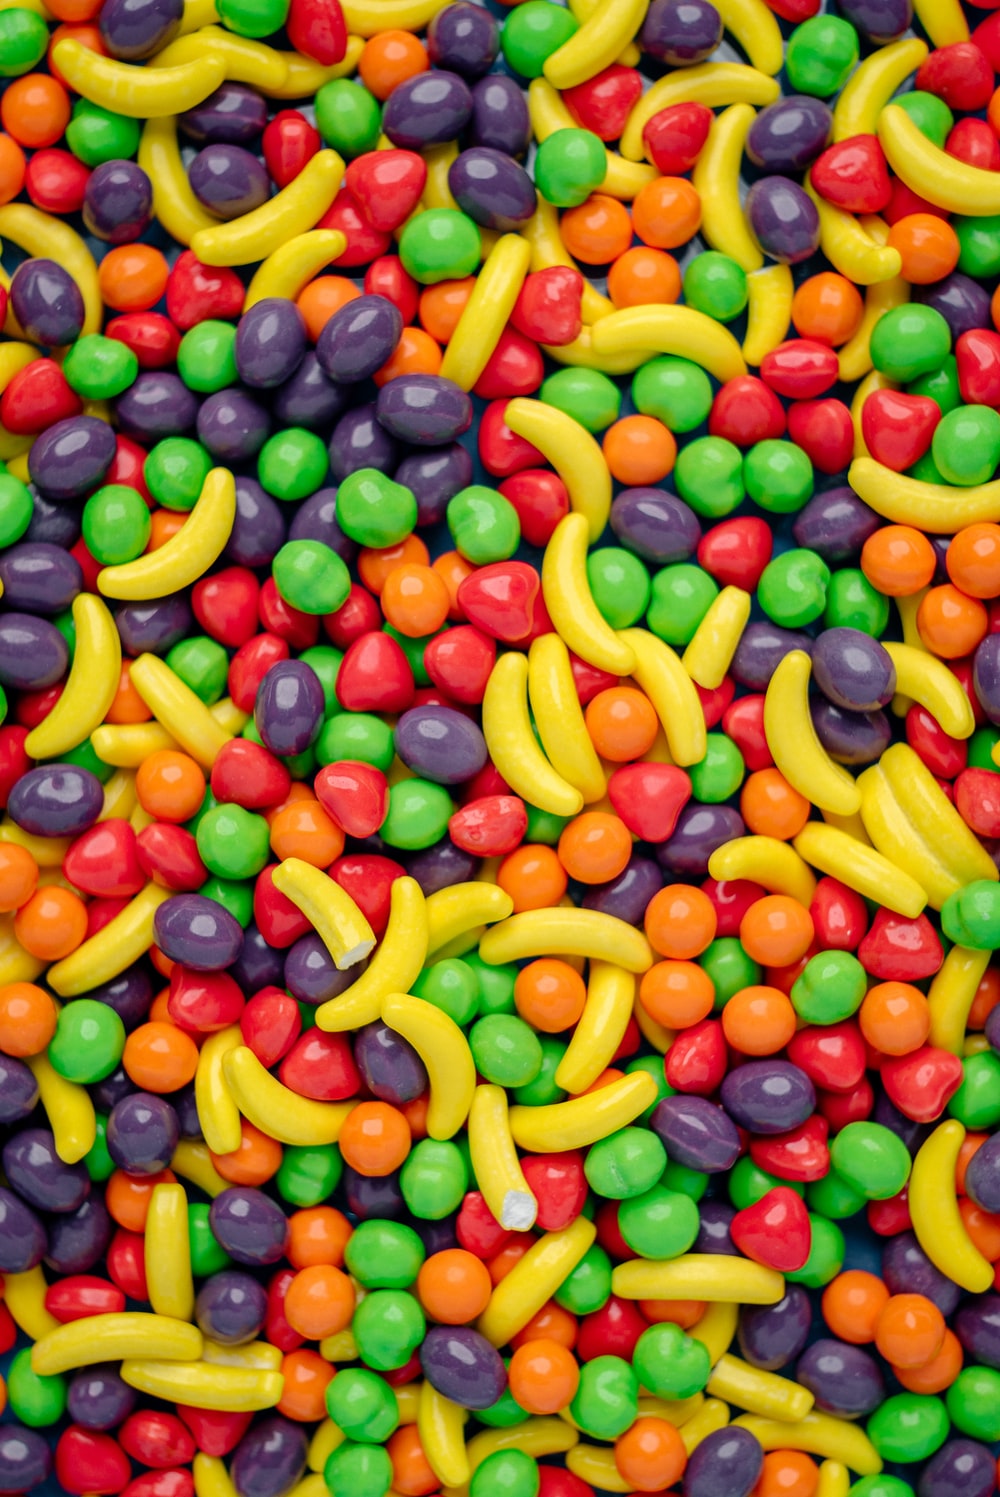 Candy Background Picture. Download Free Image